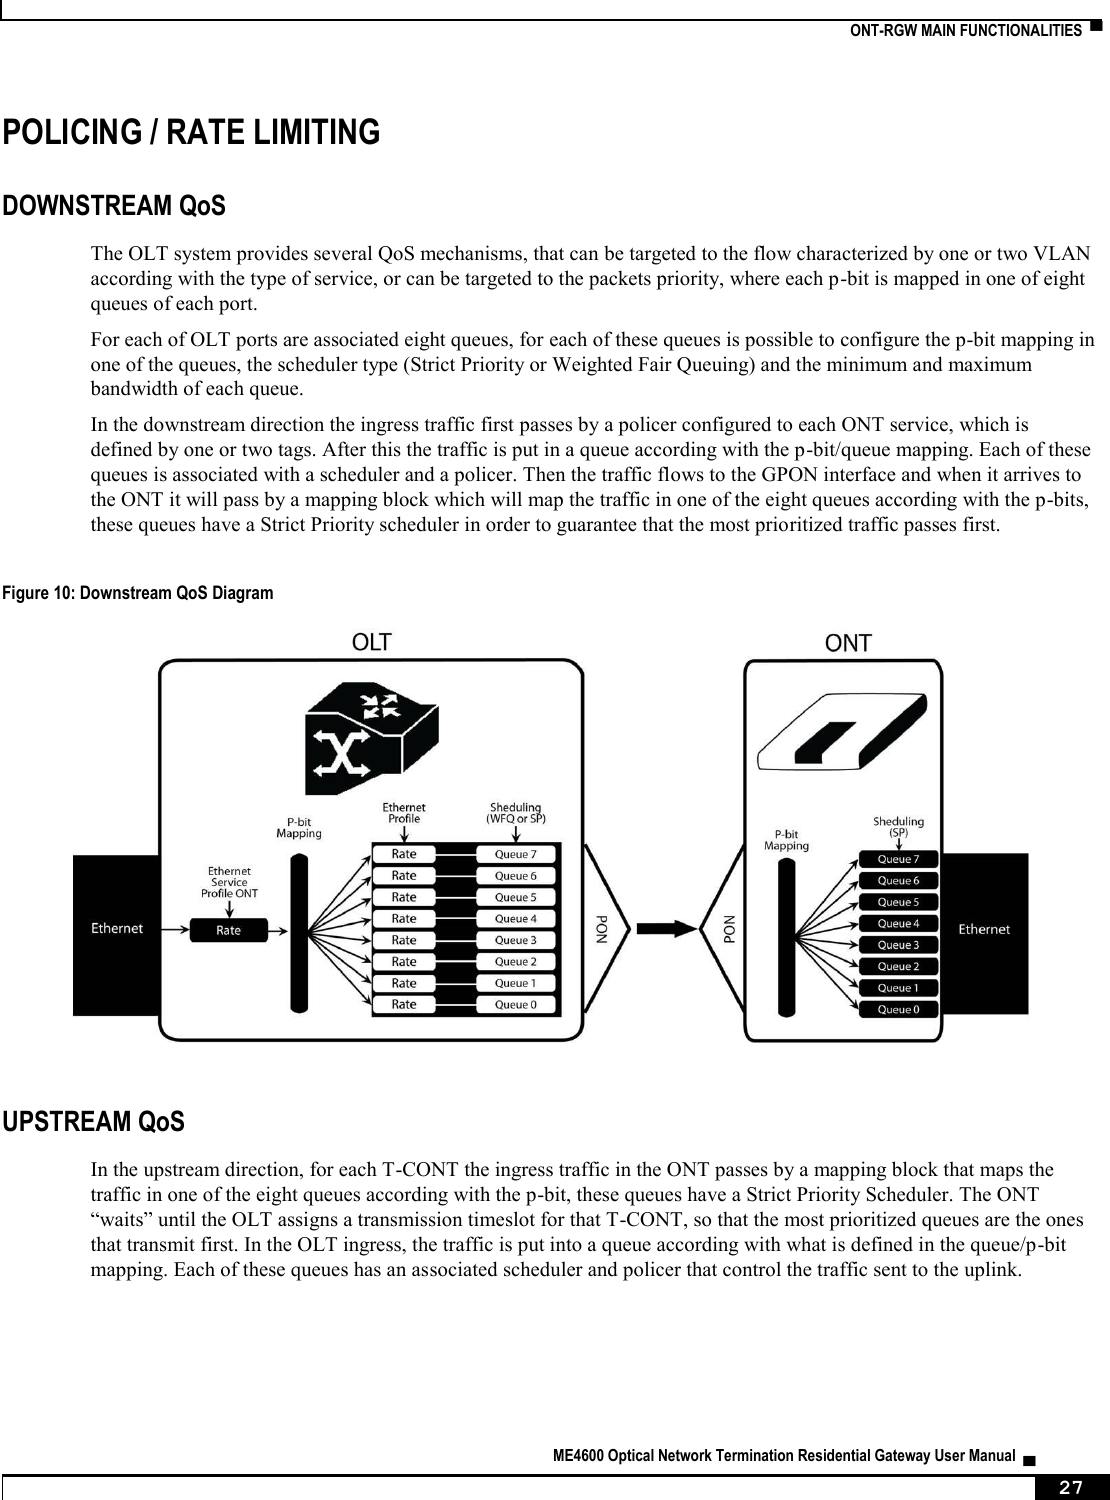    ONT-RGW MAIN FUNCTIONALITIES  ▀   ME4600 Optical Network Termination Residential Gateway User Manual  ▄     27 POLICING / RATE LIMITING DOWNSTREAM QoS The OLT system provides several QoS mechanisms, that can be targeted to the flow characterized by one or two VLAN according with the type of service, or can be targeted to the packets priority, where each p-bit is mapped in one of eight queues of each port. For each of OLT ports are associated eight queues, for each of these queues is possible to configure the p-bit mapping in one of the queues, the scheduler type (Strict Priority or Weighted Fair Queuing) and the minimum and maximum bandwidth of each queue. In the downstream direction the ingress traffic first passes by a policer configured to each ONT service, which is defined by one or two tags. After this the traffic is put in a queue according with the p-bit/queue mapping. Each of these queues is associated with a scheduler and a policer. Then the traffic flows to the GPON interface and when it arrives to the ONT it will pass by a mapping block which will map the traffic in one of the eight queues according with the p-bits, these queues have a Strict Priority scheduler in order to guarantee that the most prioritized traffic passes first.  Figure 10: Downstream QoS Diagram   UPSTREAM QoS In the upstream direction, for each T-CONT the ingress traffic in the ONT passes by a mapping block that maps the traffic in one of the eight queues according with the p-bit, these queues have a Strict Priority Scheduler. The ONT “waits” until the OLT assigns a transmission timeslot for that T-CONT, so that the most prioritized queues are the ones that transmit first. In the OLT ingress, the traffic is put into a queue according with what is defined in the queue/p-bit mapping. Each of these queues has an associated scheduler and policer that control the traffic sent to the uplink.  